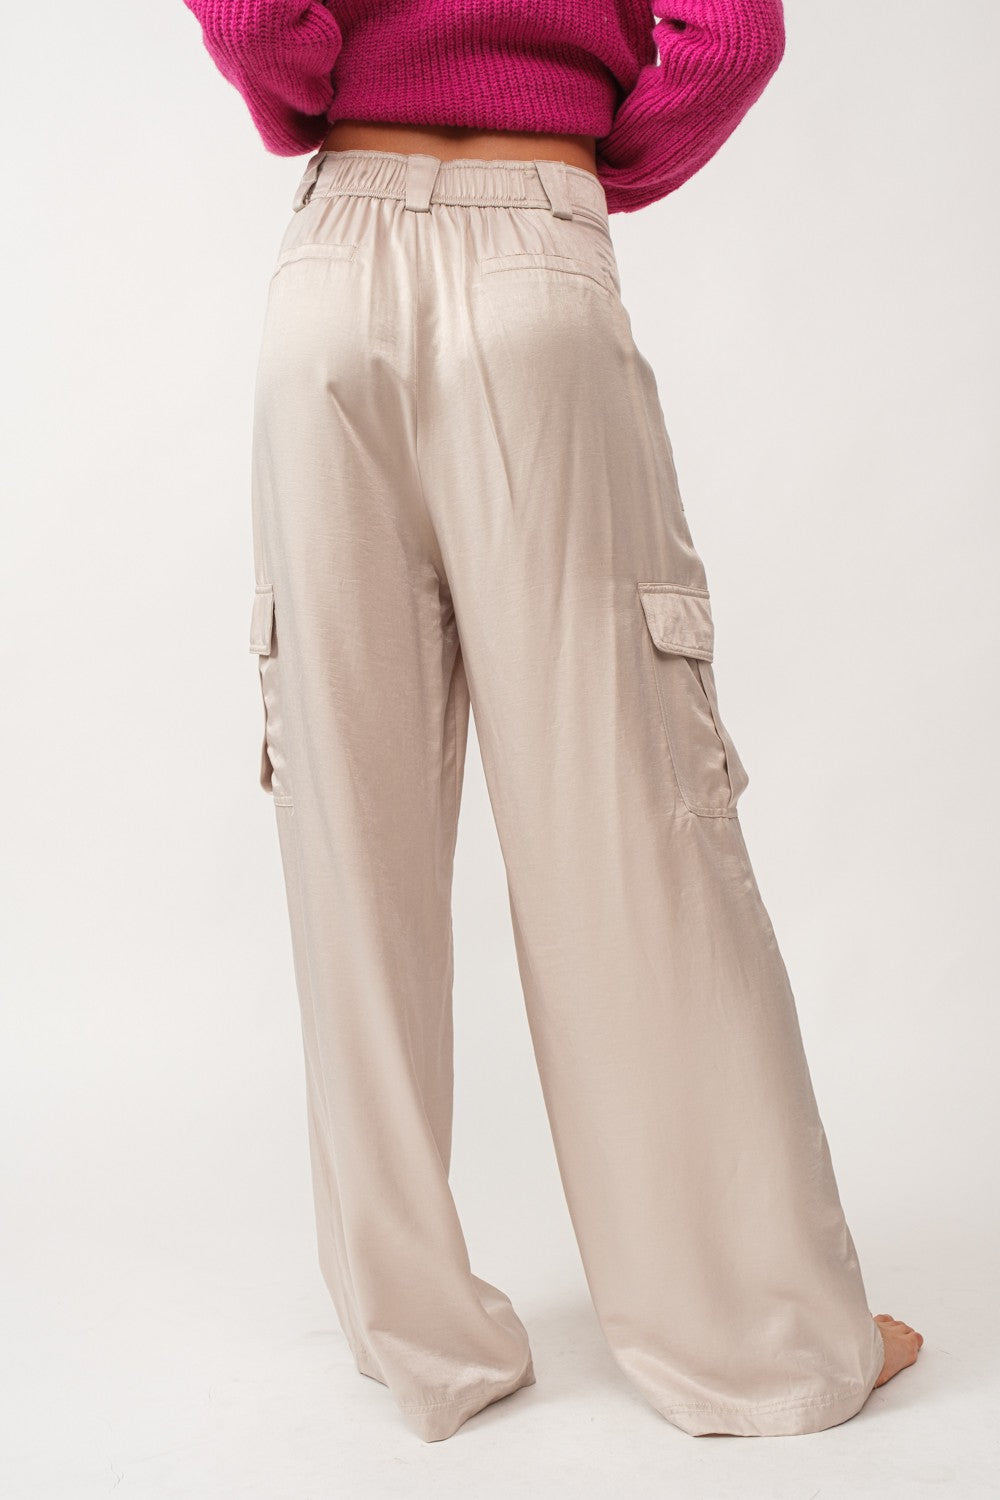 Avery Wide Leg Cargo Pants are designed with a wider fit and high waist to provide maximum comfort. Crafted from a blend of 57% Polyester and 43% Rayon, these cargo pants feature elastic back waist and multiple cargo pockets for added convenience. Perfect for any occasion.